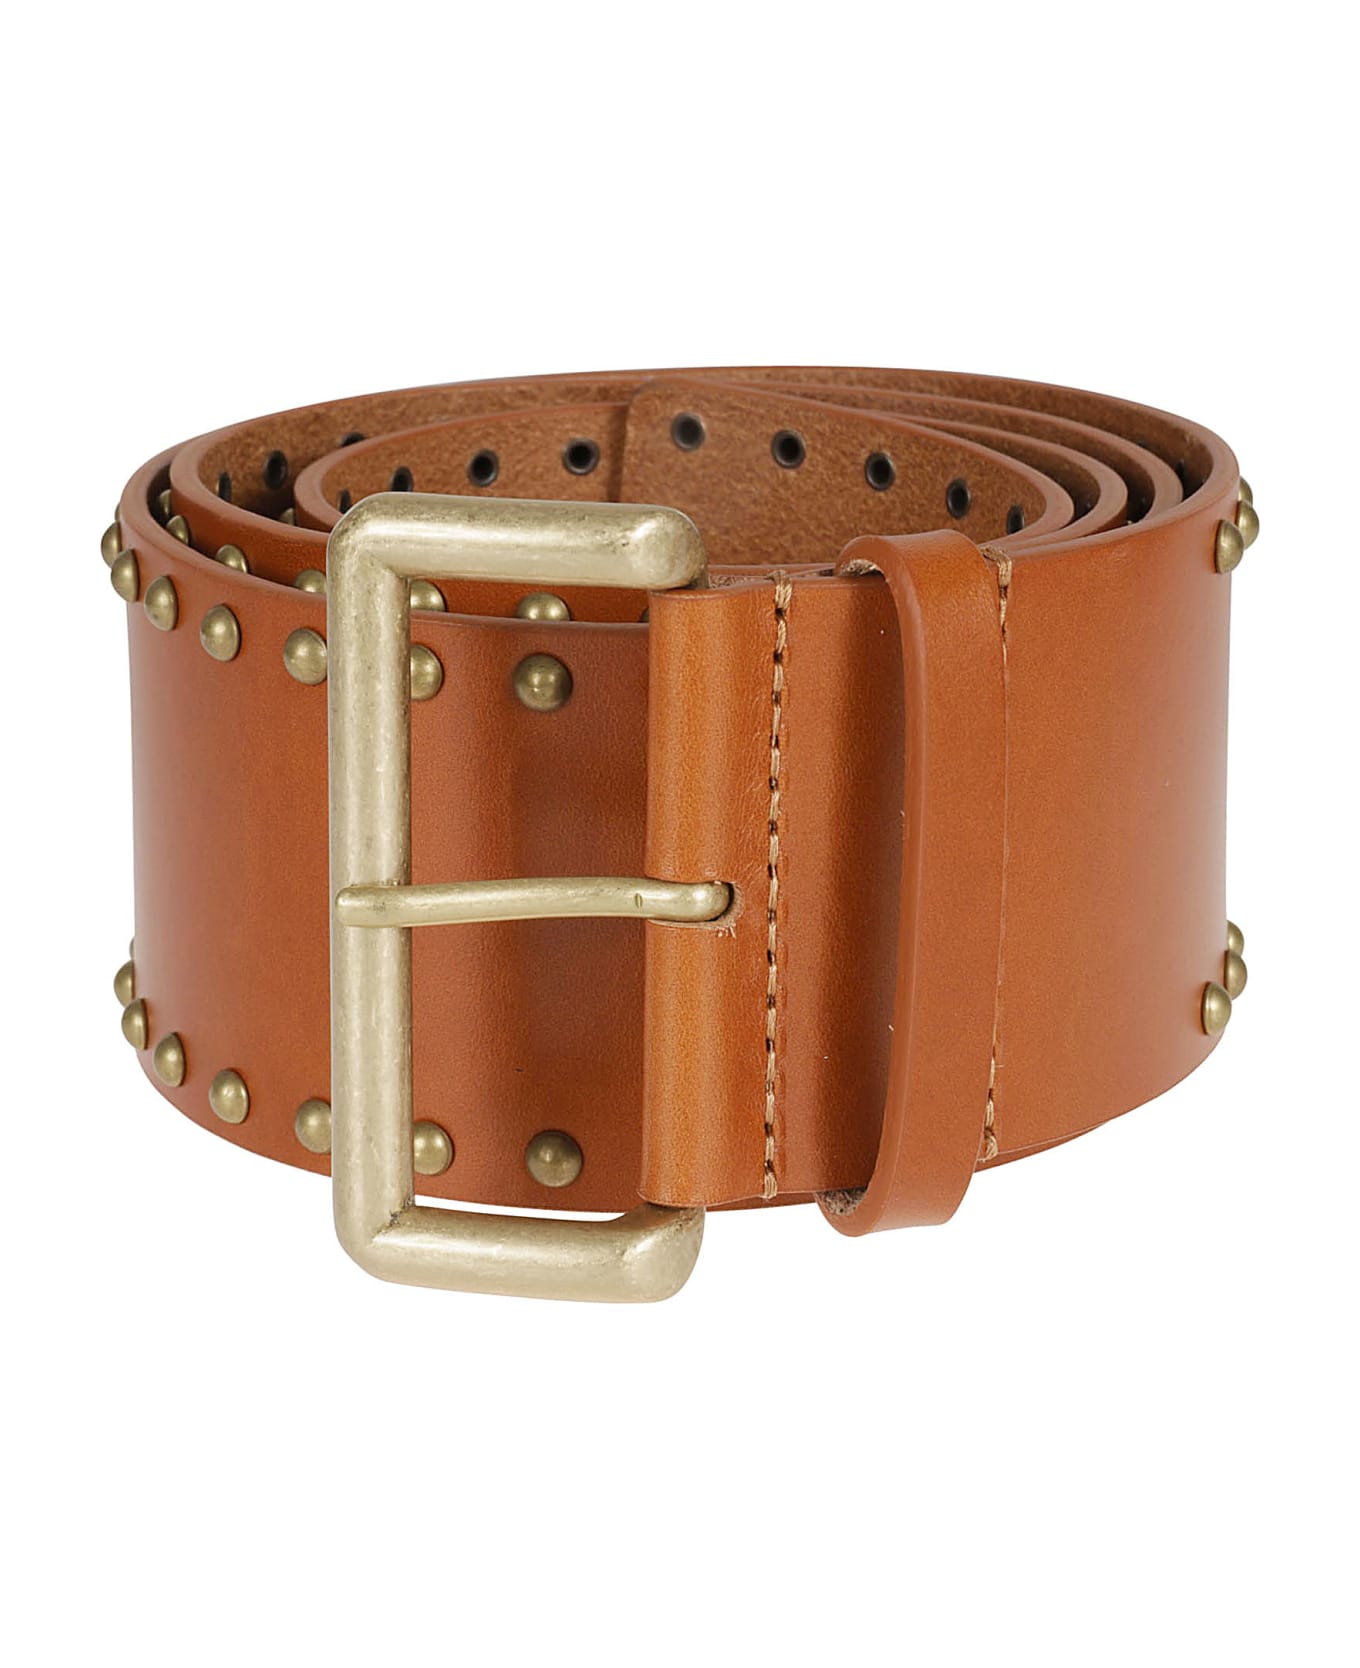 Zamattio Alessia  Belts Leather Brown - Leather Brown ベルト